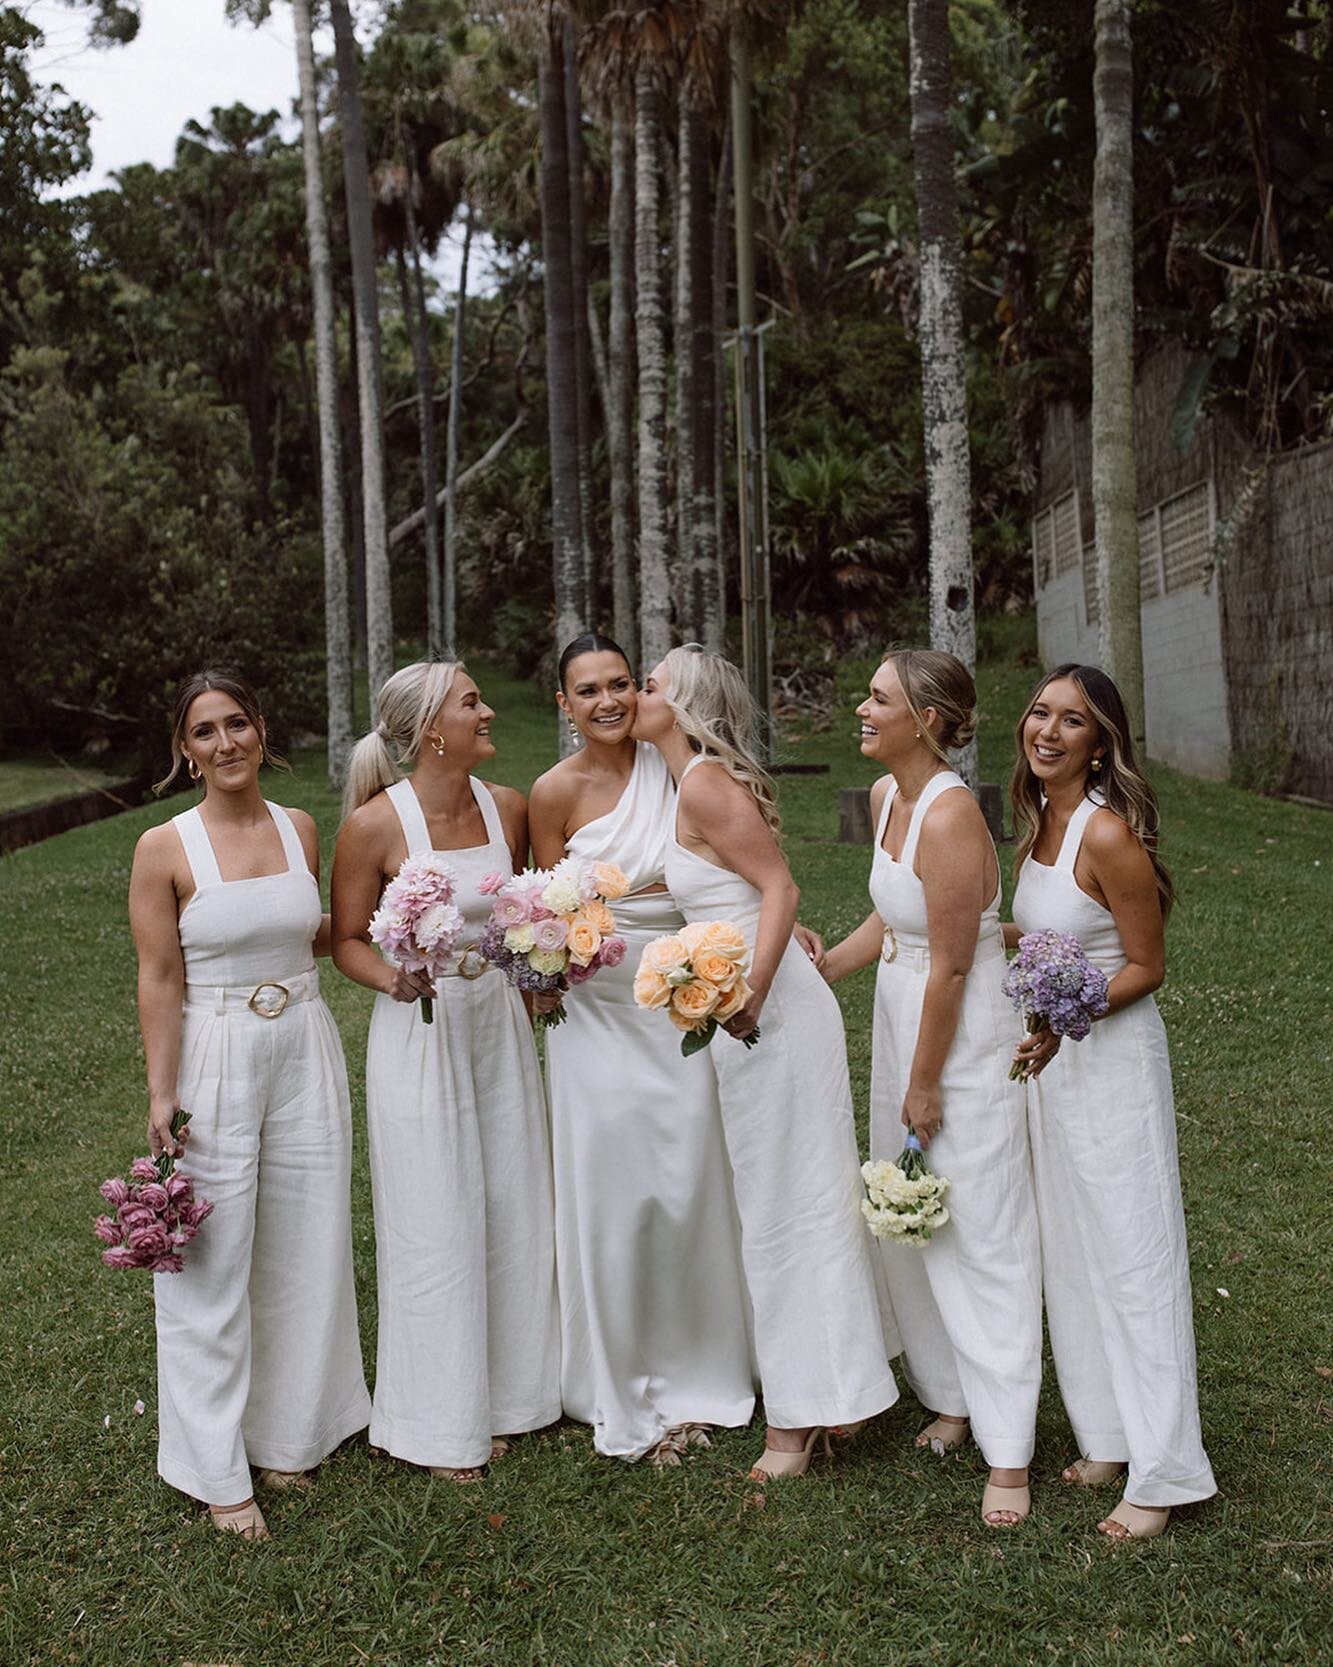 Oh here&rsquo;s some of them South Coast babes now 😍 

White wedding party jumpsuits for these sweet things, sharing the love with their gal Sal.

Cracker list of vendors:
Photos - @tomcoburn_ 
Cele - yours truely @the_romantic_celebrant 
Venue - @d